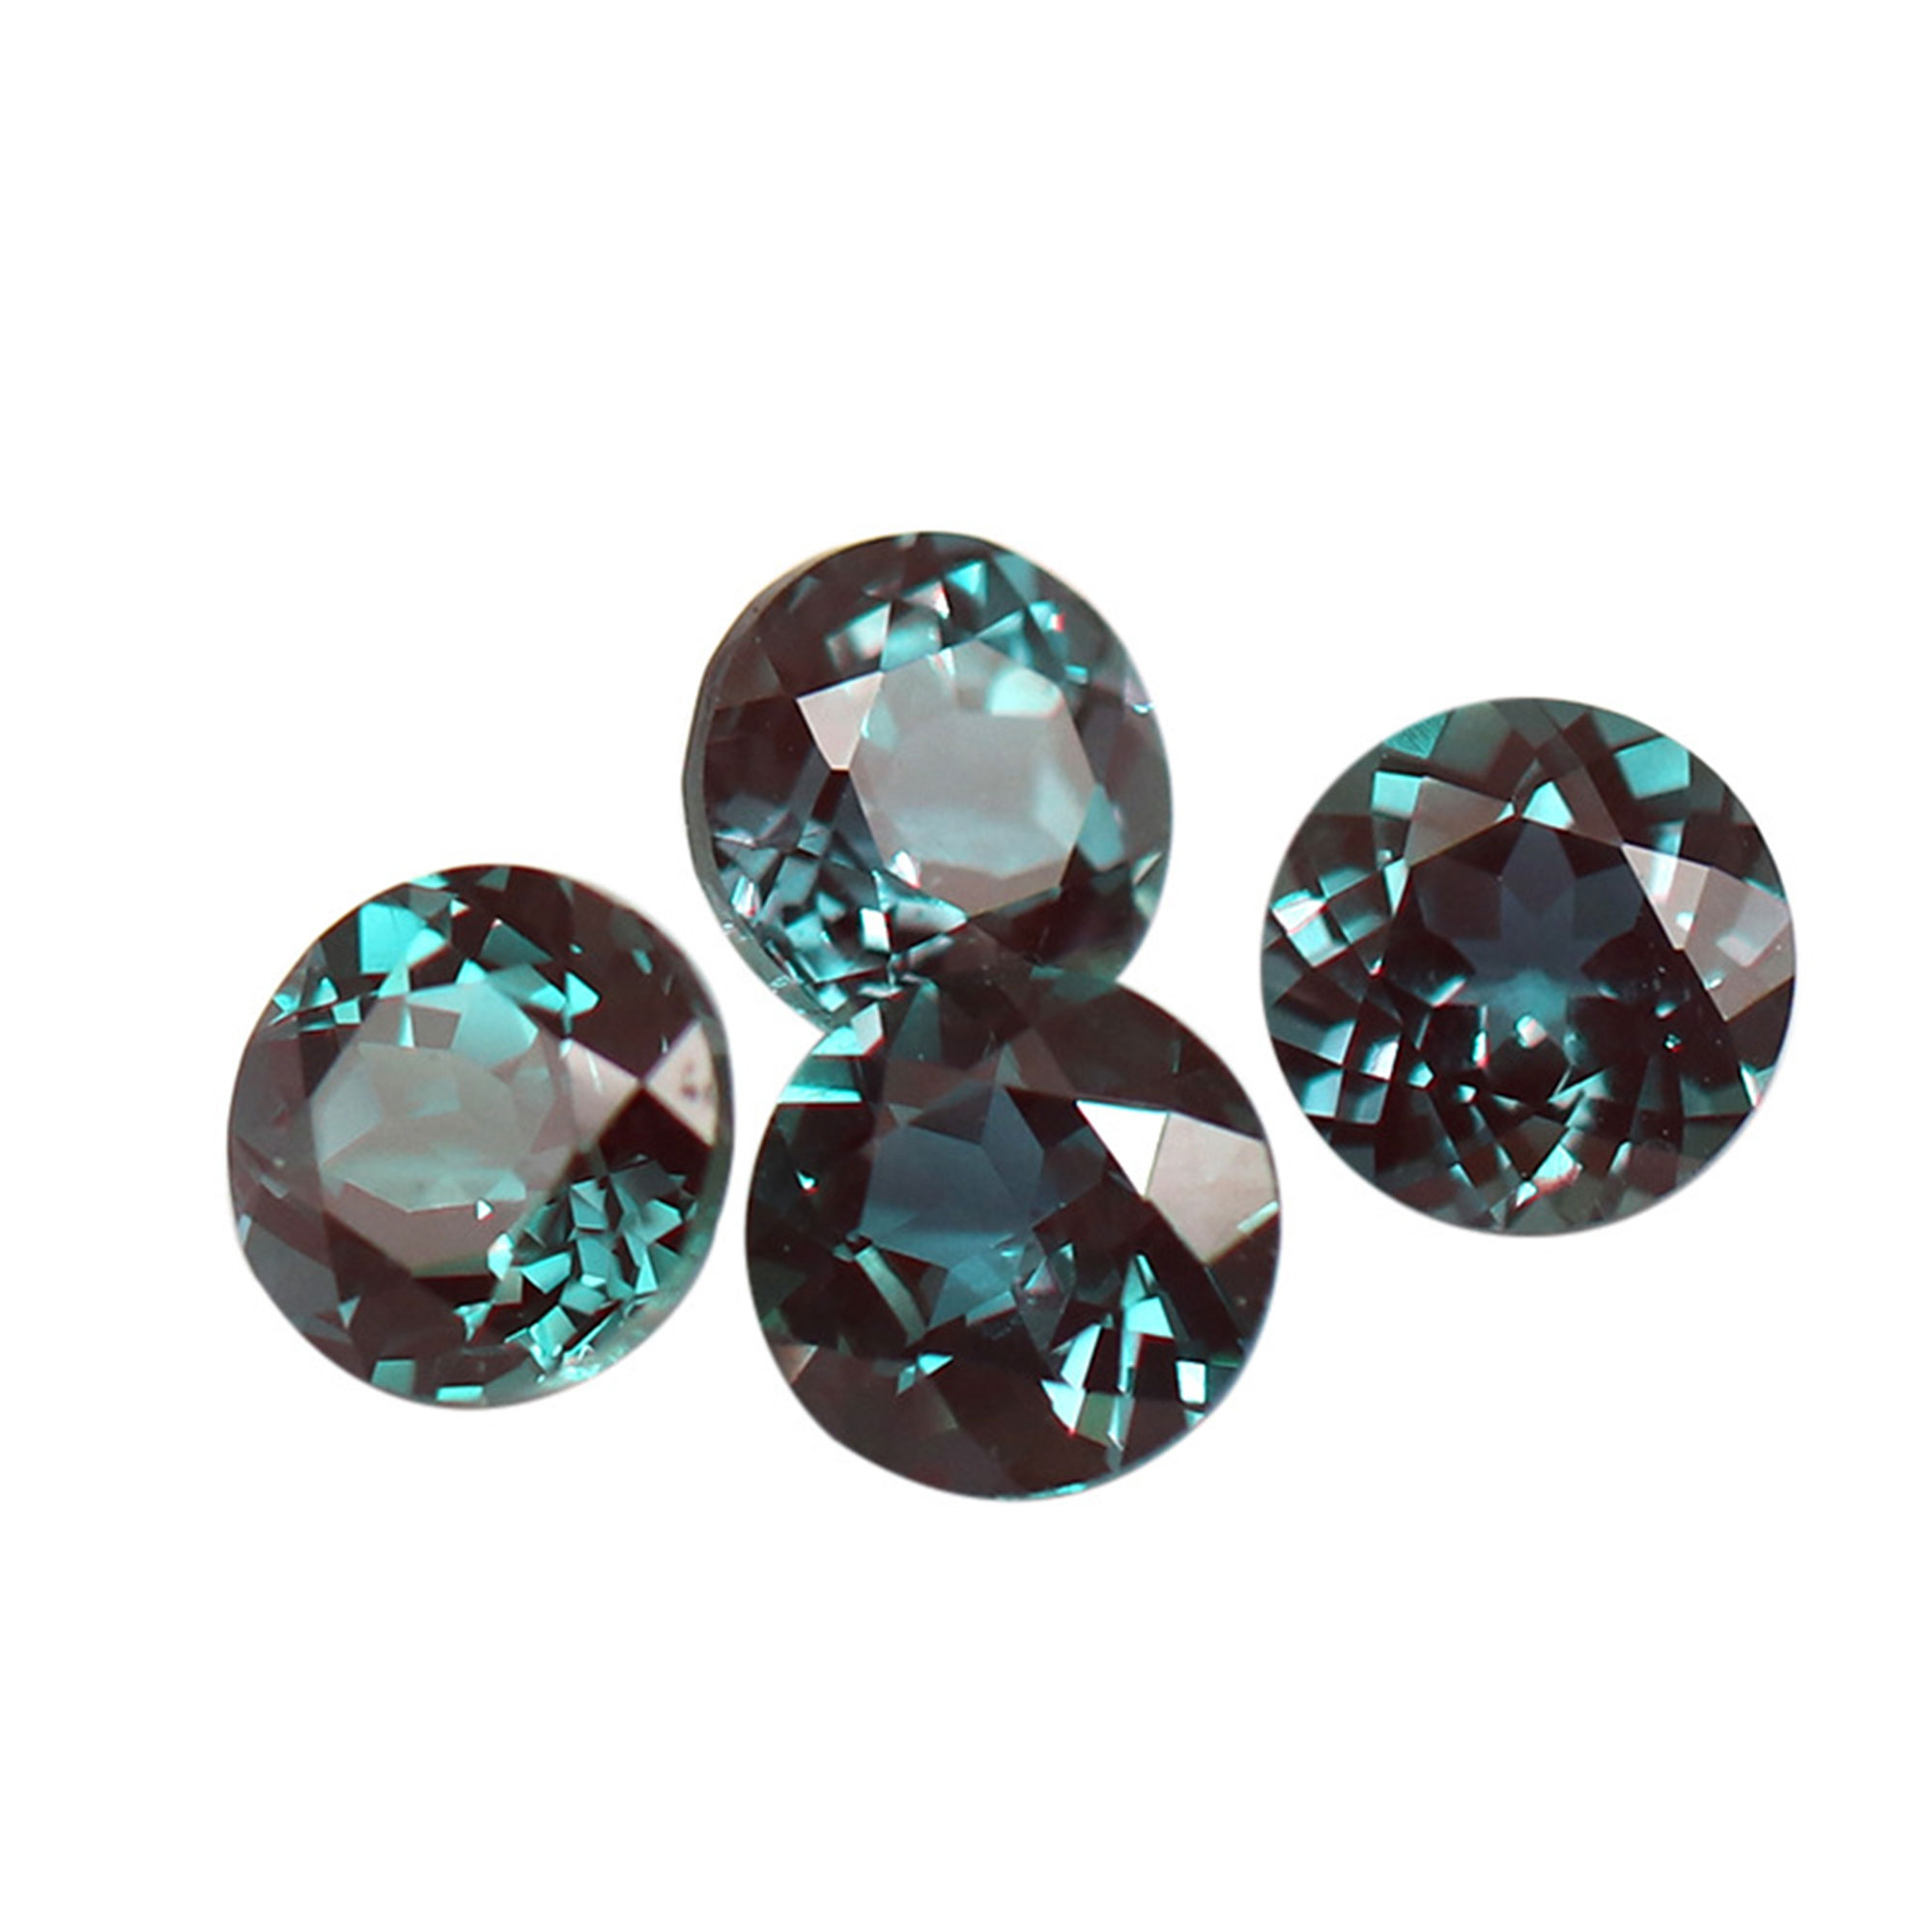 Lab Grown Alexandrite Faceted Gemstone,Round Color Change Stone,June Birthstone,DIY Loose Gemstone Supplies 4110200 - Click Image to Close